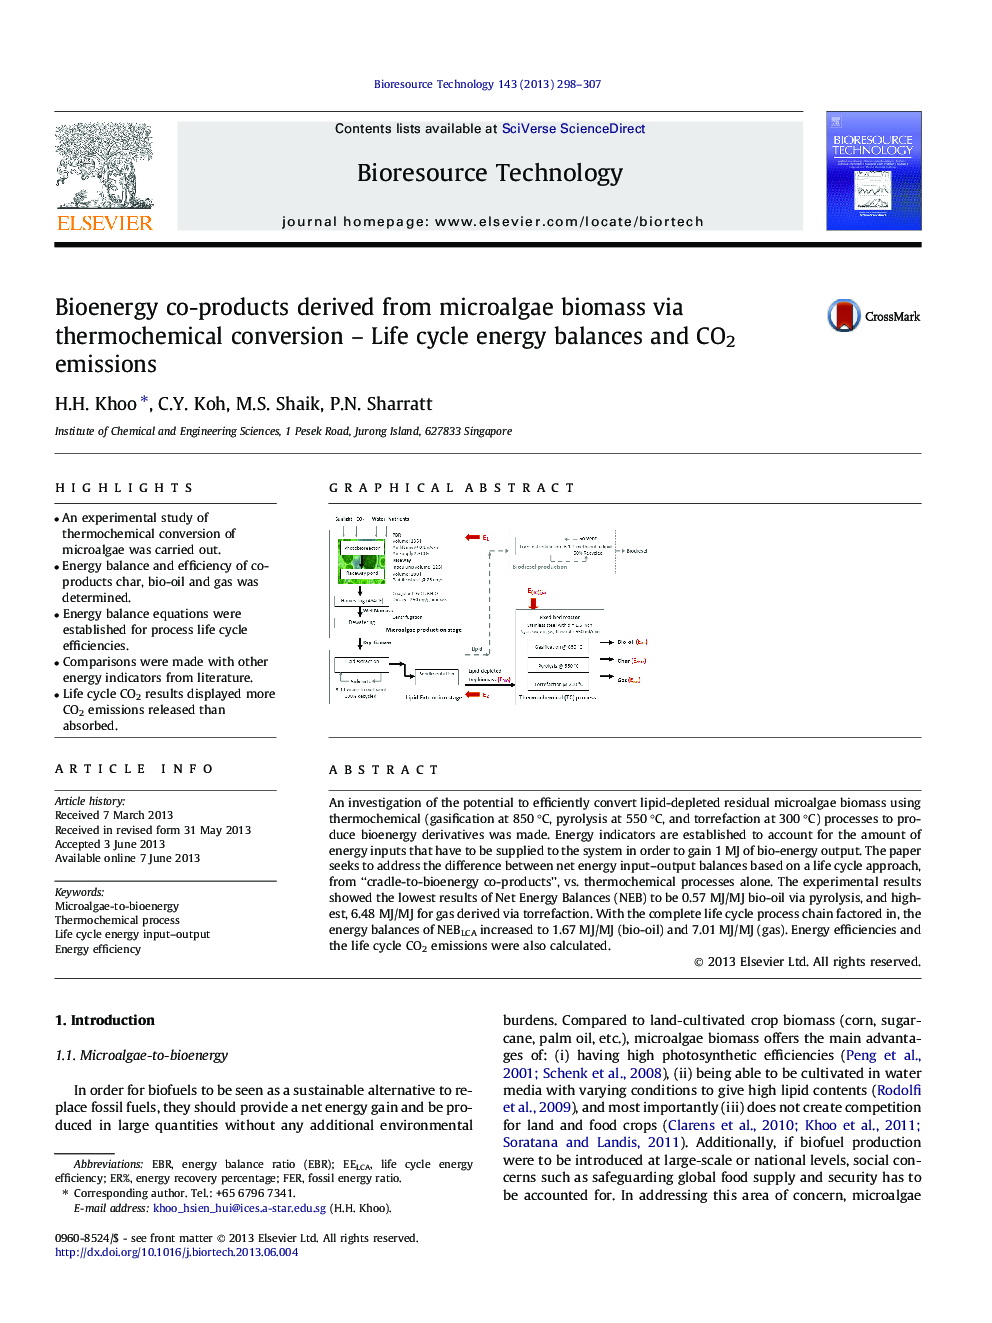 Bioenergy co-products derived from microalgae biomass via thermochemical conversion - Life cycle energy balances and CO2 emissions